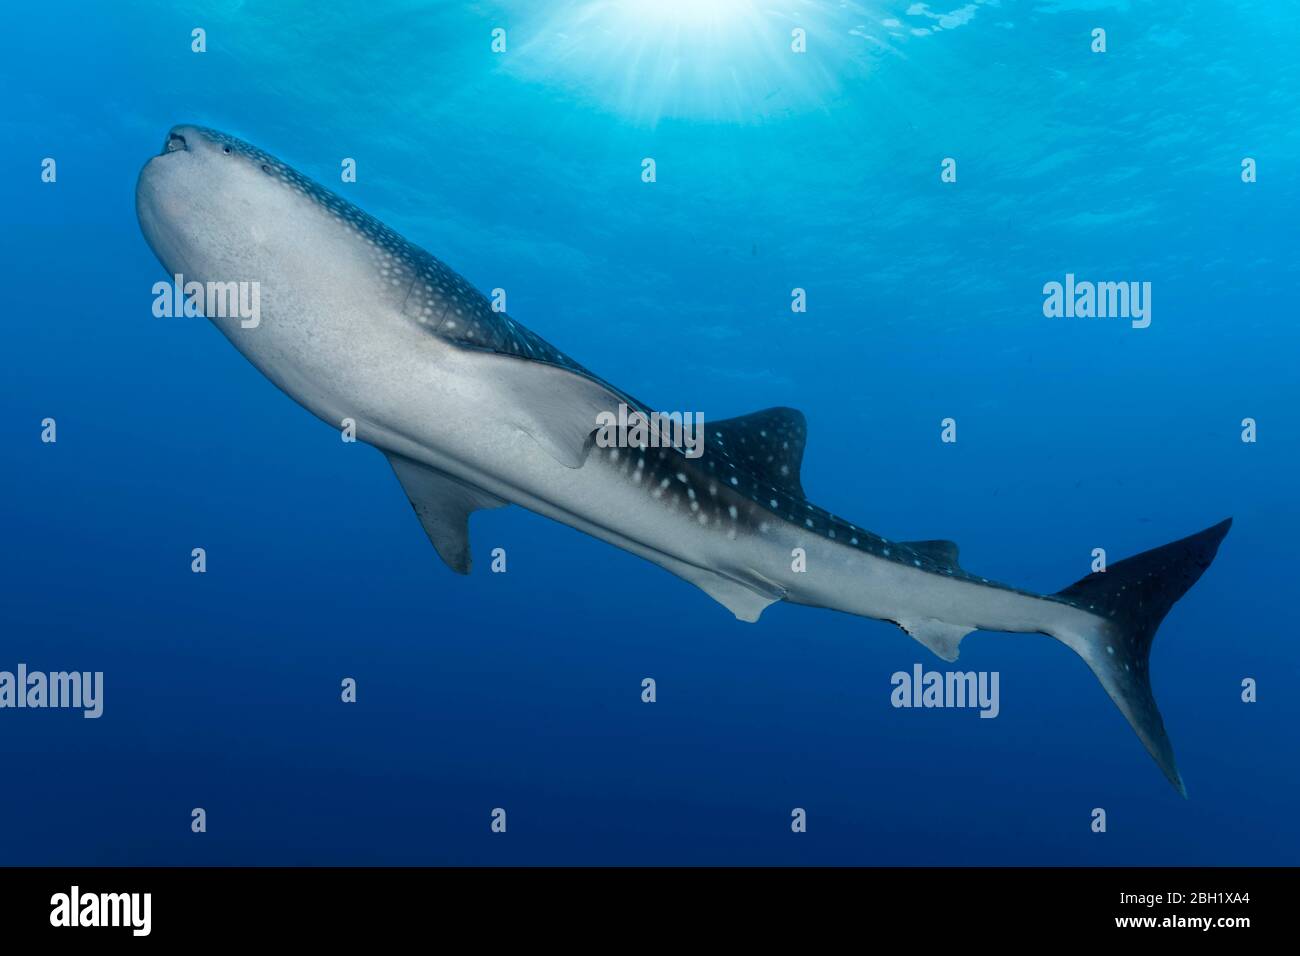 Whale shark (Rhincodon typus) from below, in blue water, Pacific Ocean, Sulu Lake, Tubbataha Reef National Marine Park, Palawan Province, Philippines Stock Photo